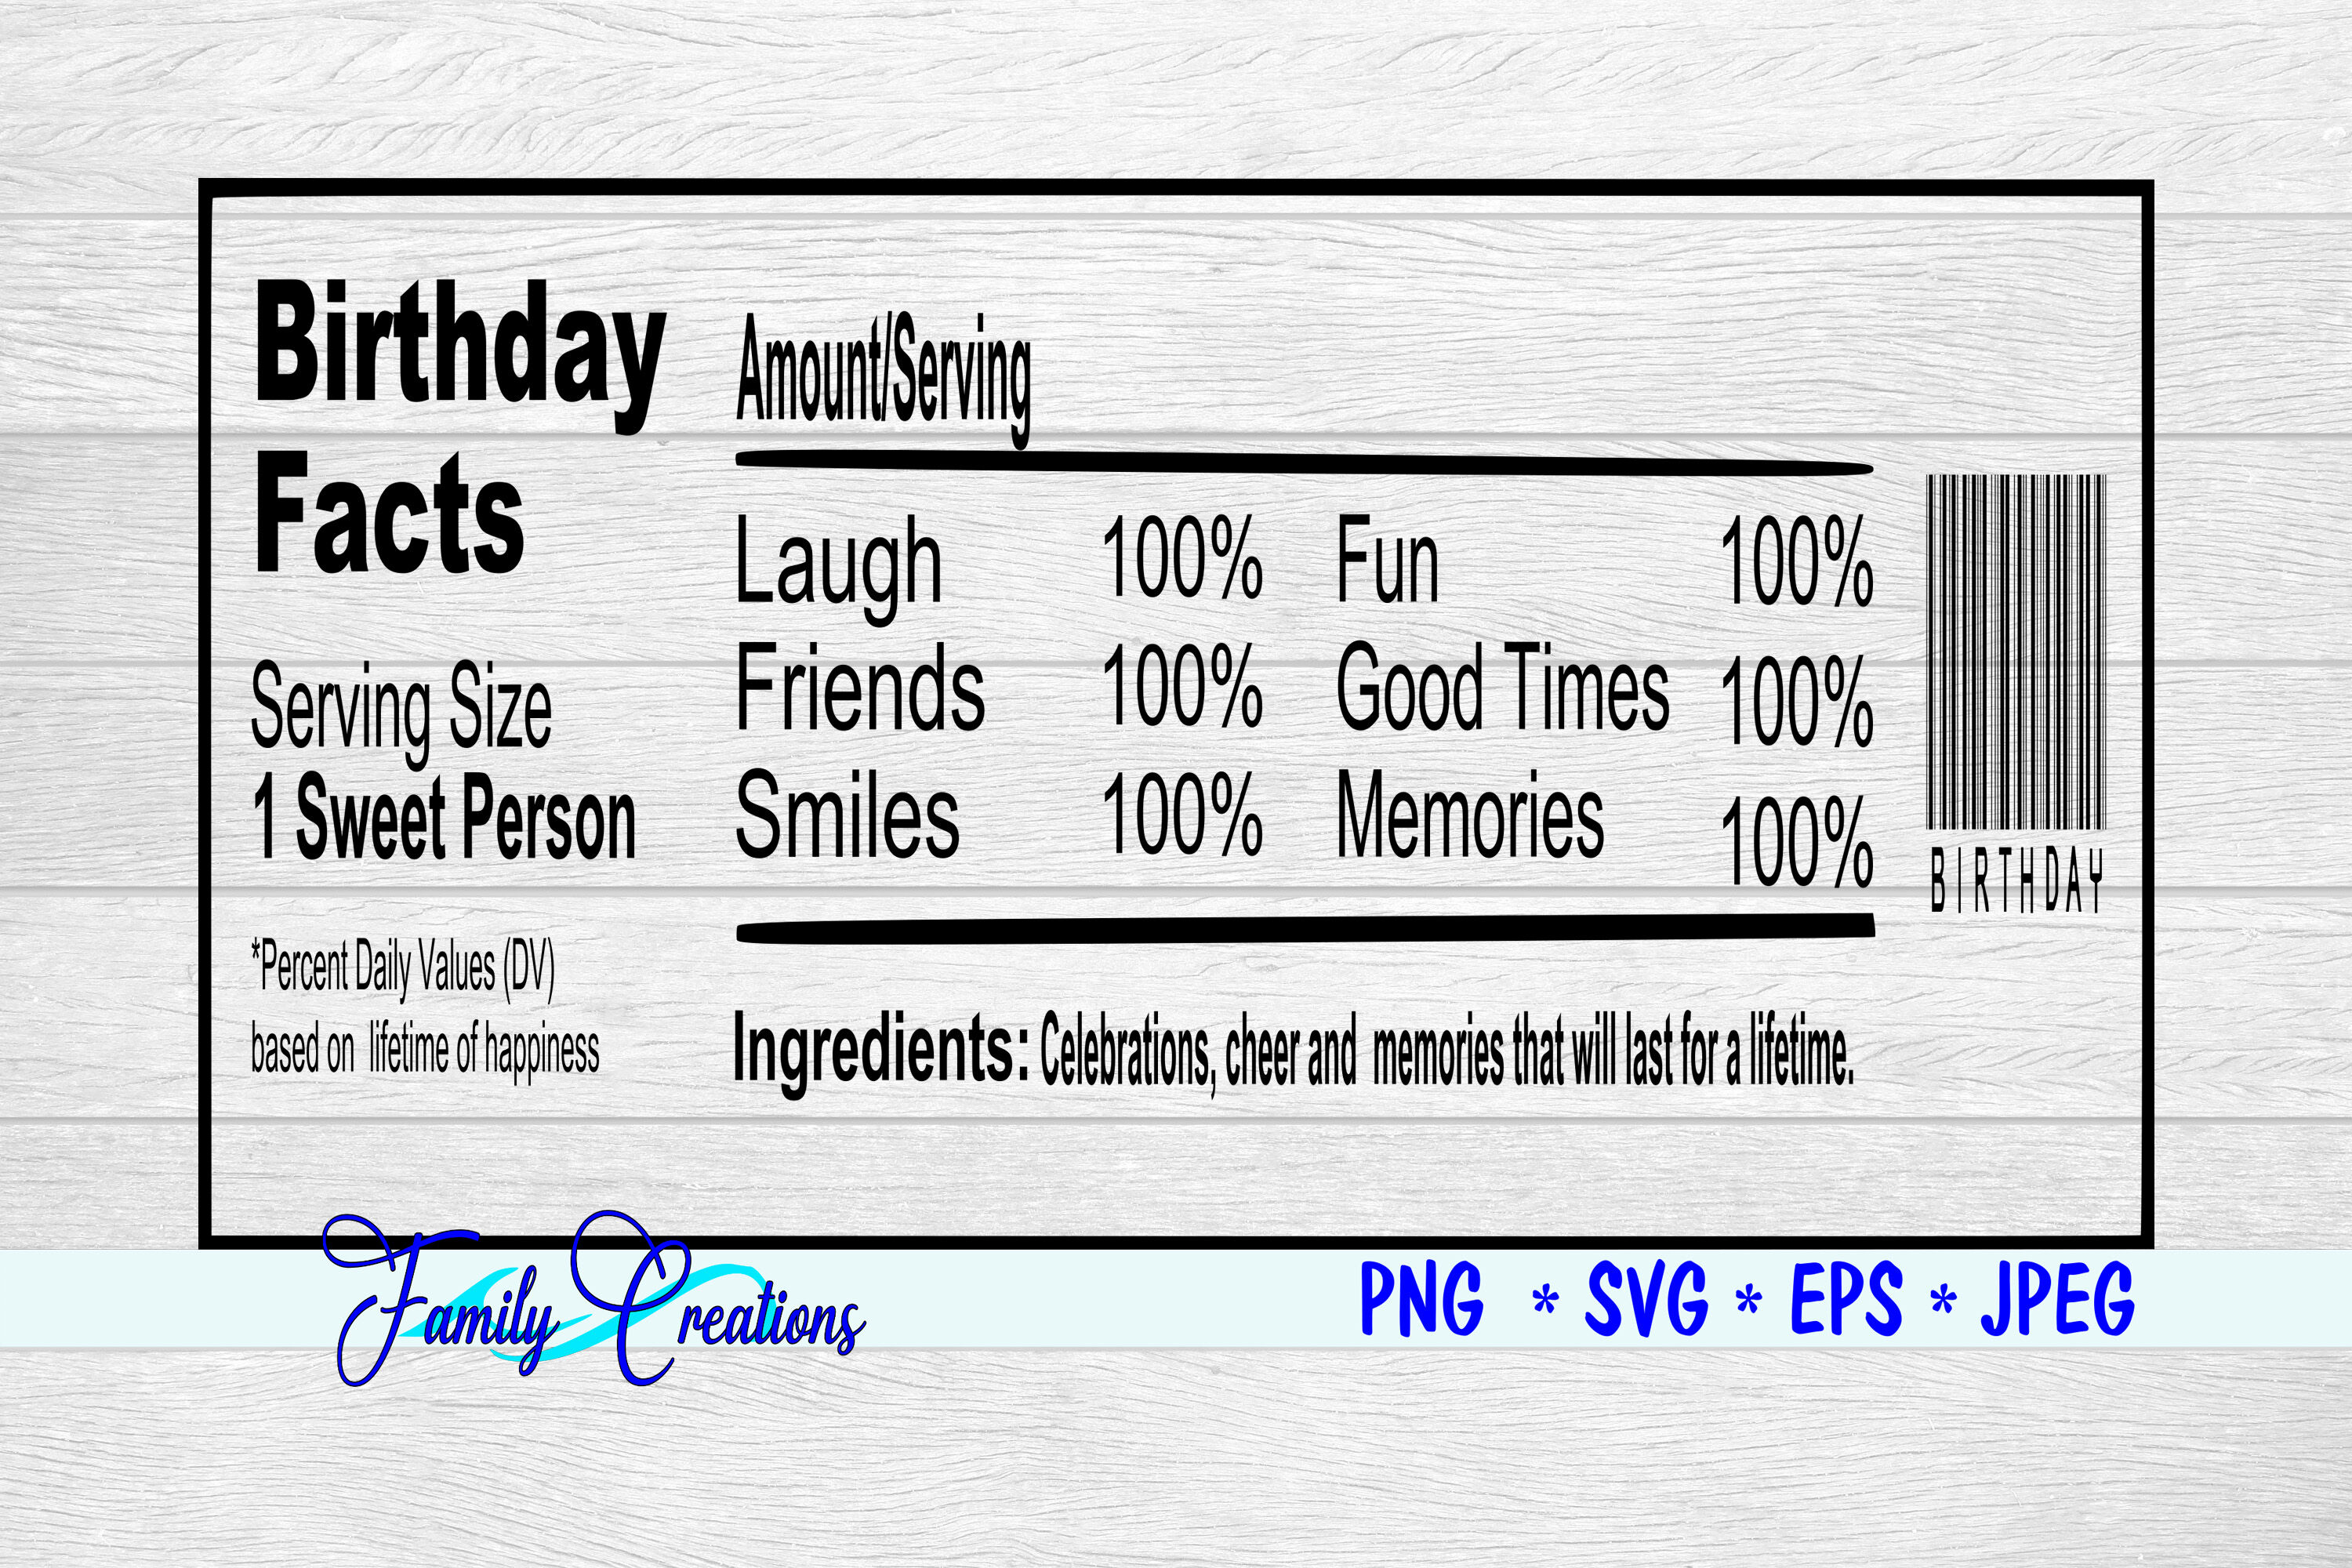 Birthday Nutrition Facts Label Template Get More Anythink s